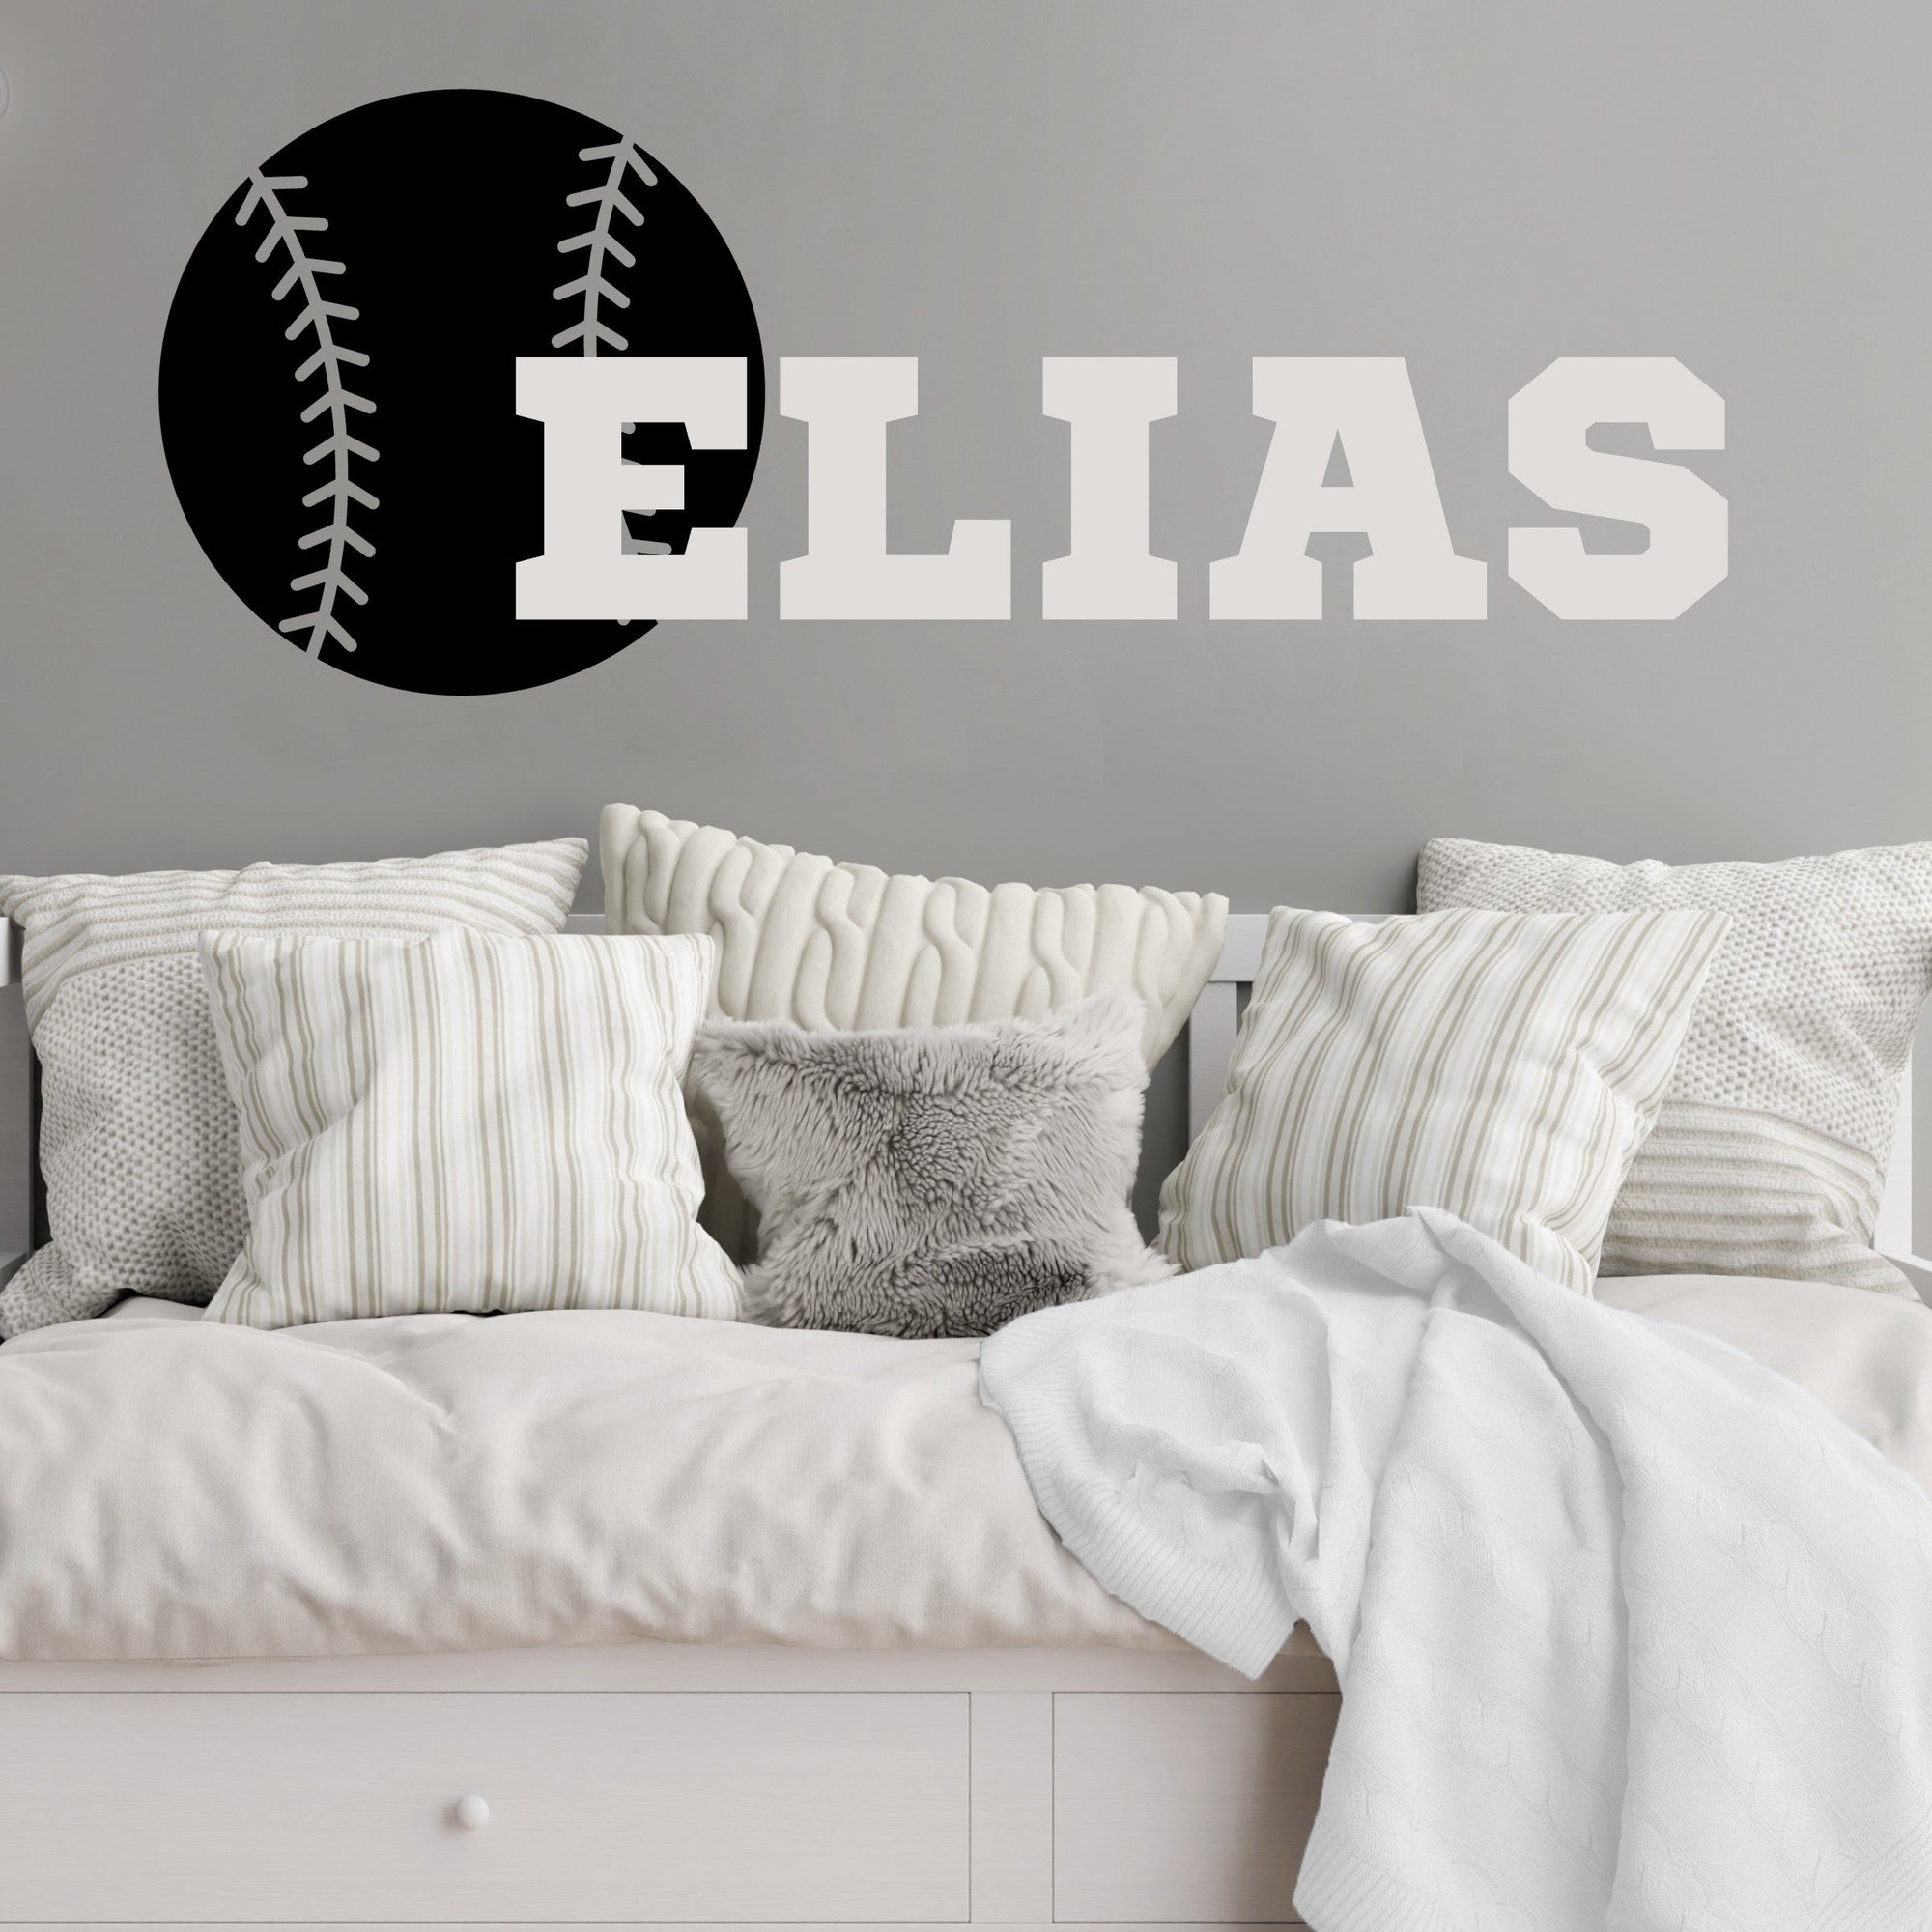 Baseball Wall Decal with Name - Personalized Gift for Baseball Player